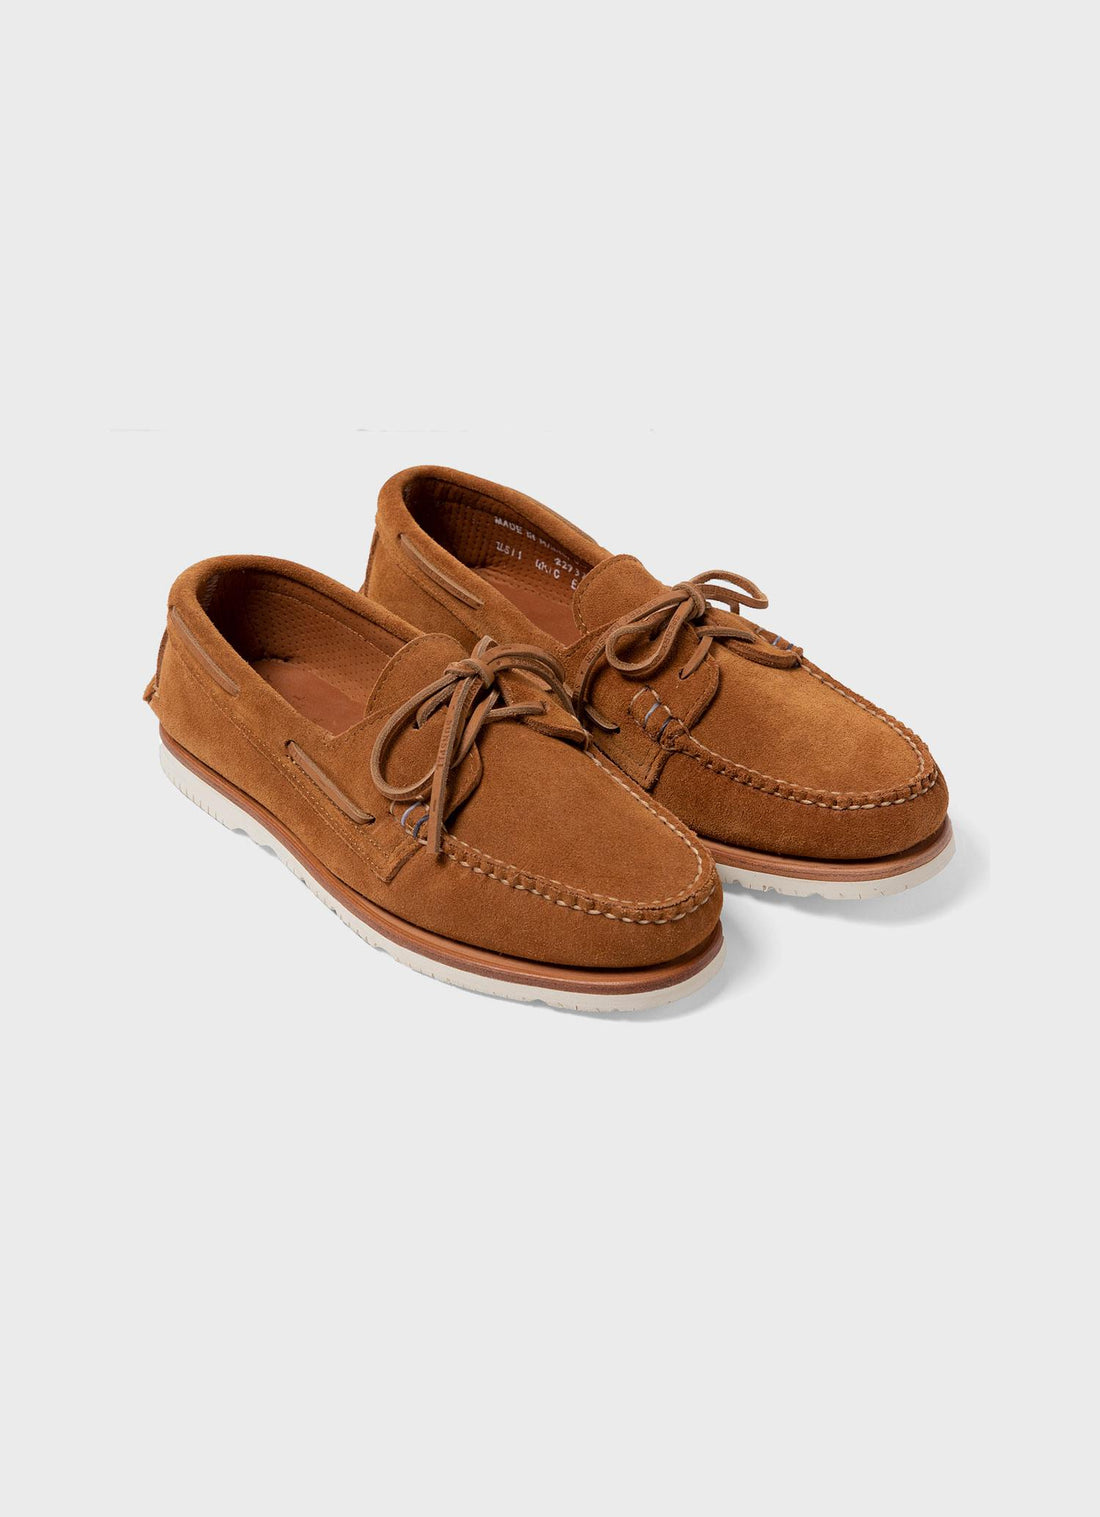 Men's Sunspel and Sperry Suede Boat Shoe in Sand